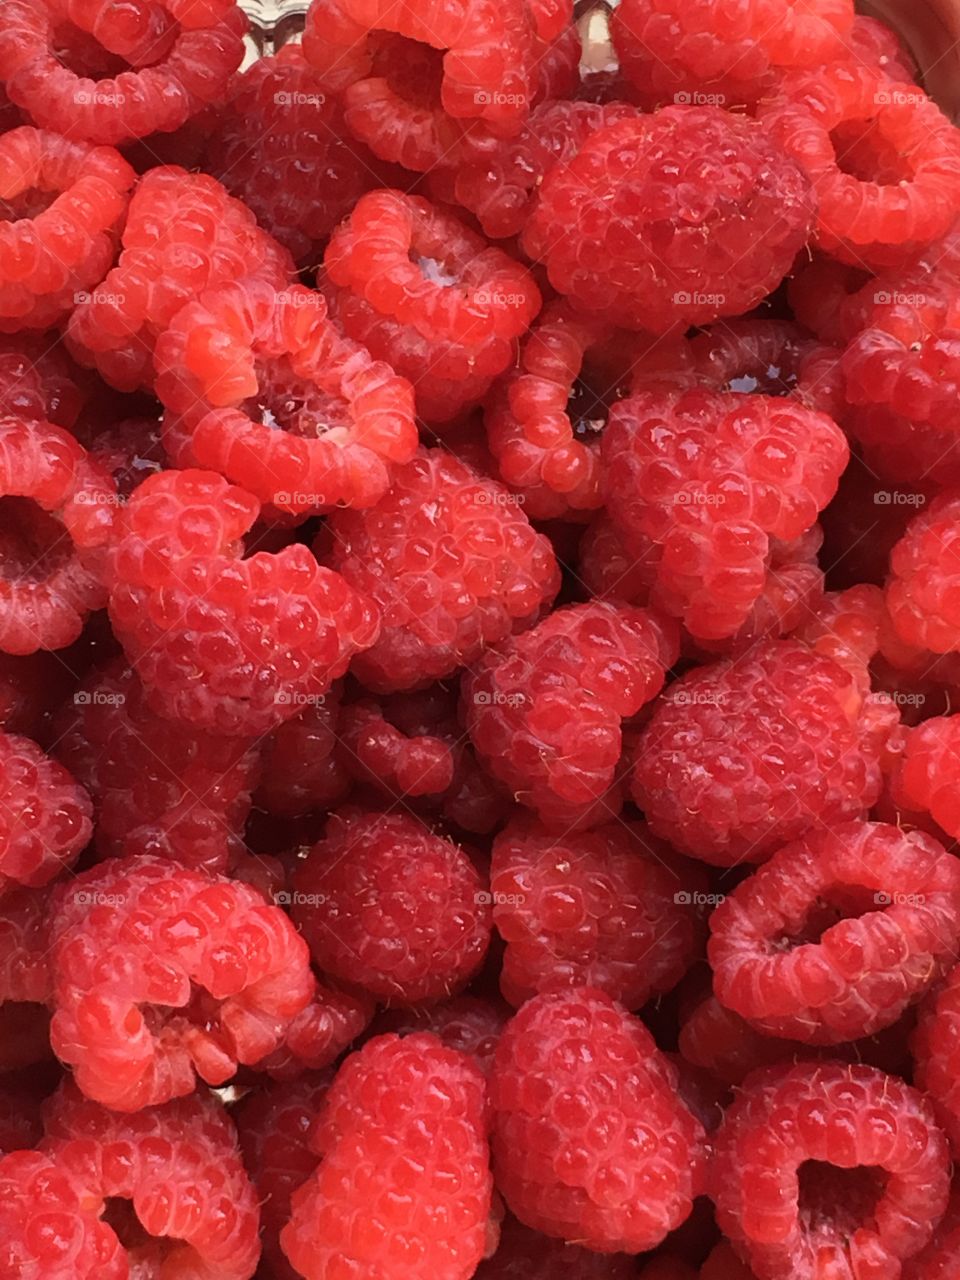 Raspberry fresh from the market